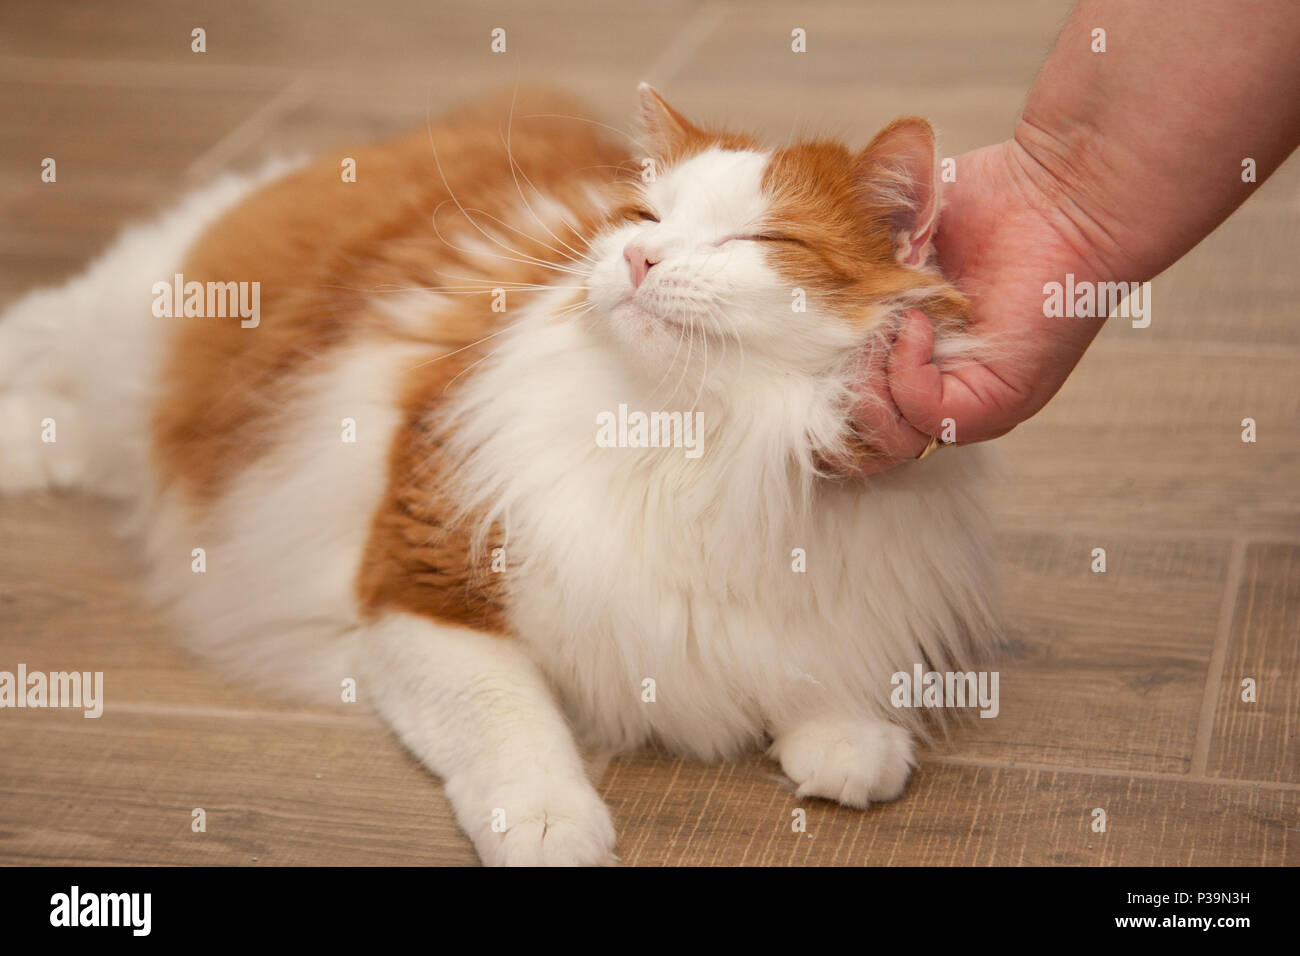 An orange and white cat purrs happily while being petted Stock Photo